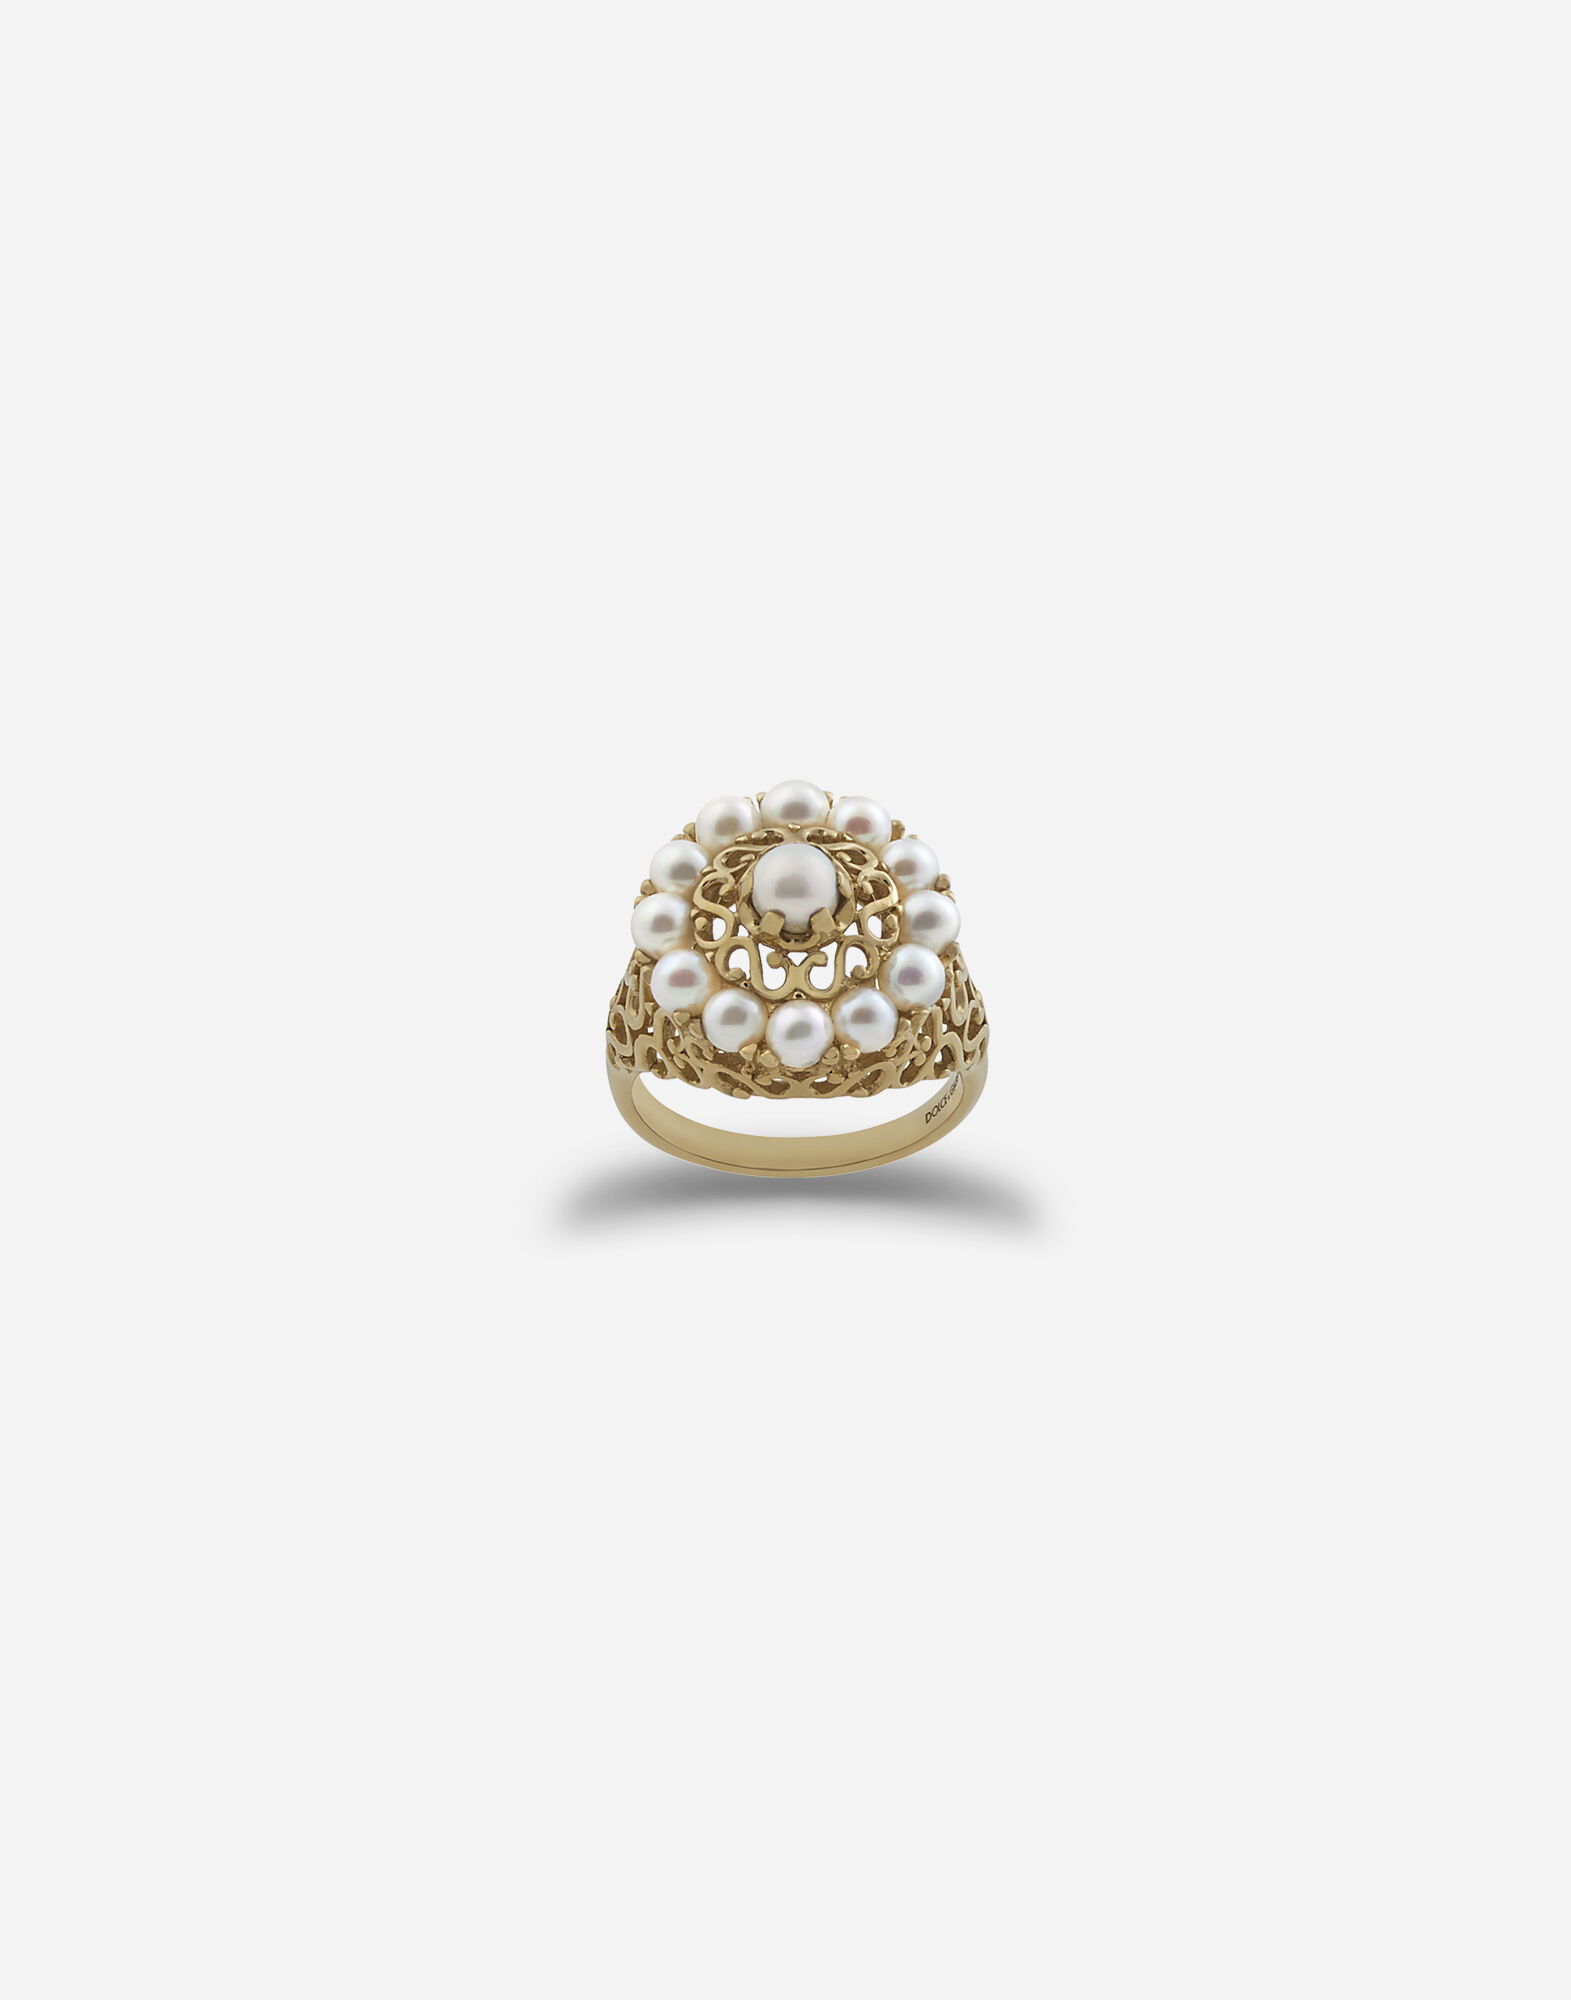 Dolce & Gabbana Romance ring in yellow gold and pearls Black WWJC2SXCMDT